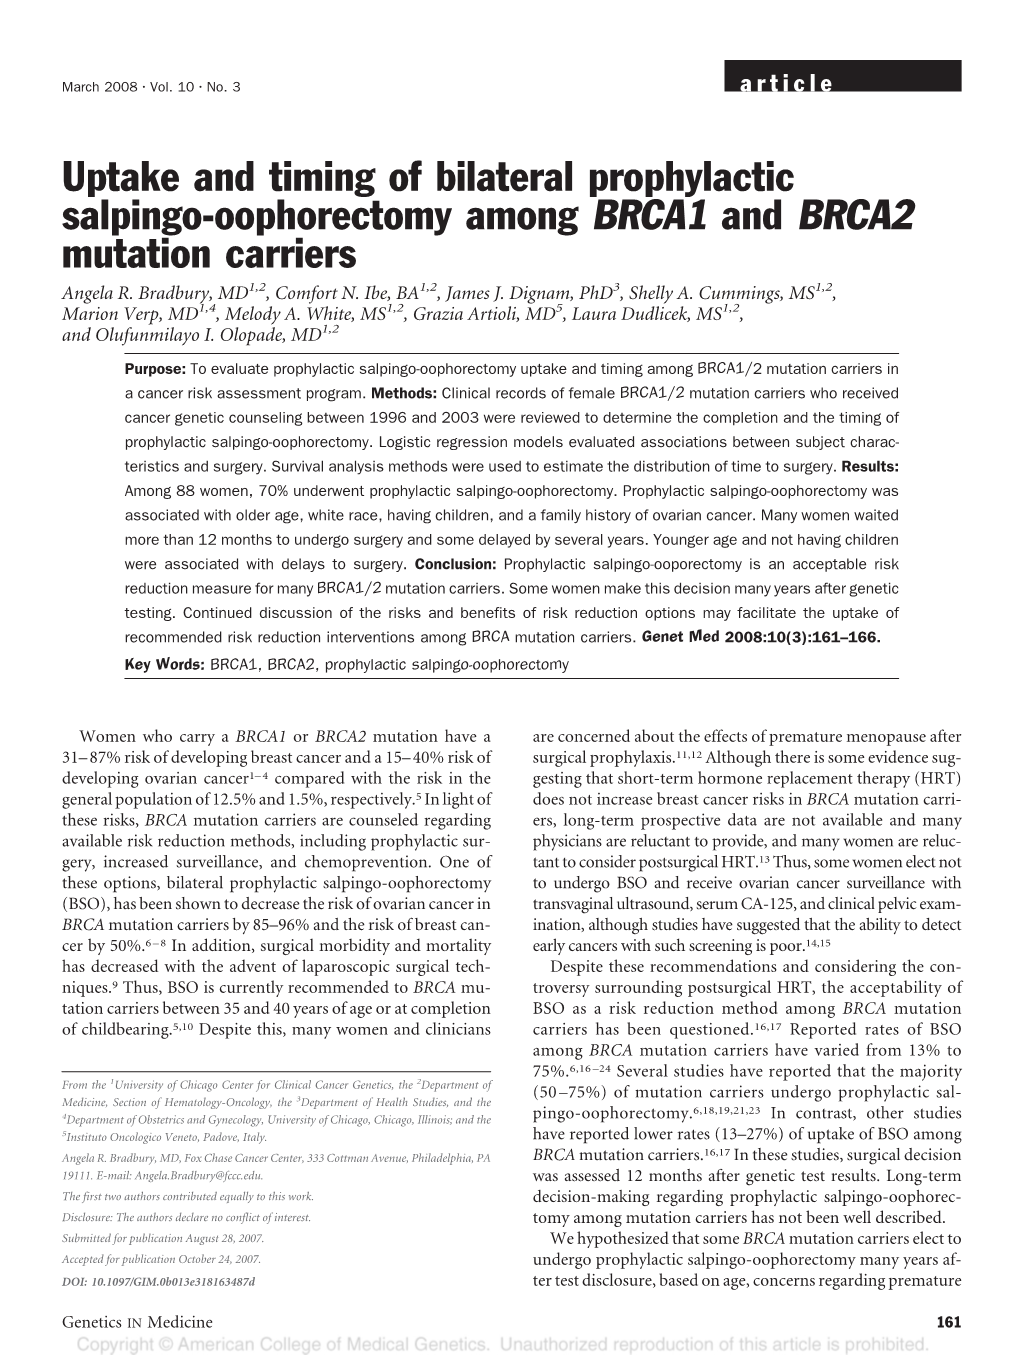 Uptake and Timing of Bilateral Prophylactic Salpingo-Oophorectomy Among BRCA1 and BRCA2 Mutation Carriers Angela R